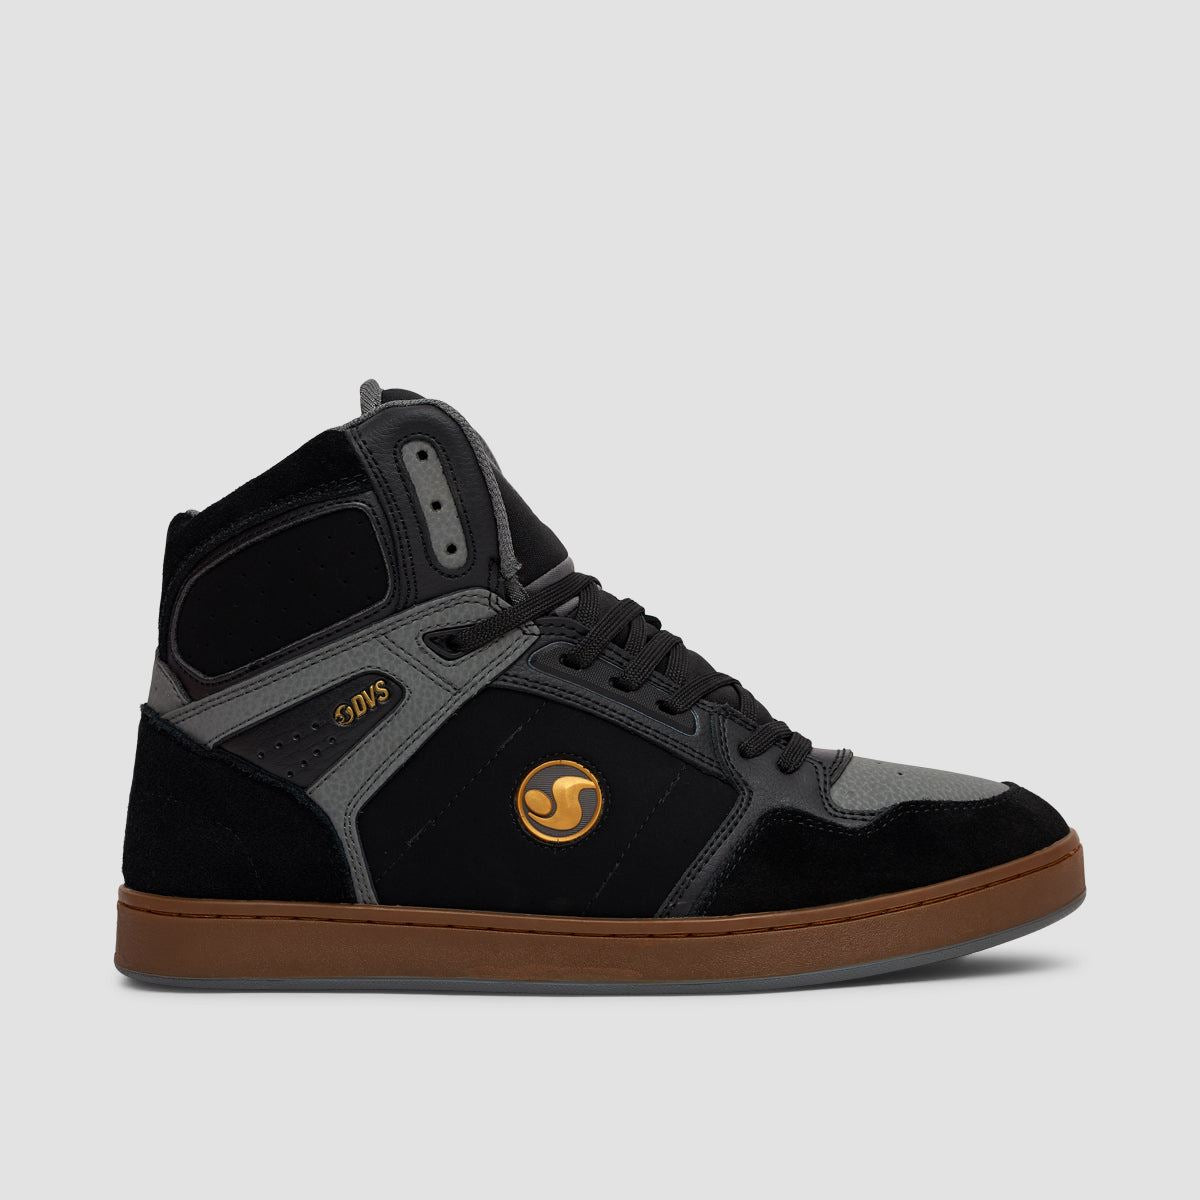 DVS Honcho High Top Shoes - Black/Charcoal/Gold Suede